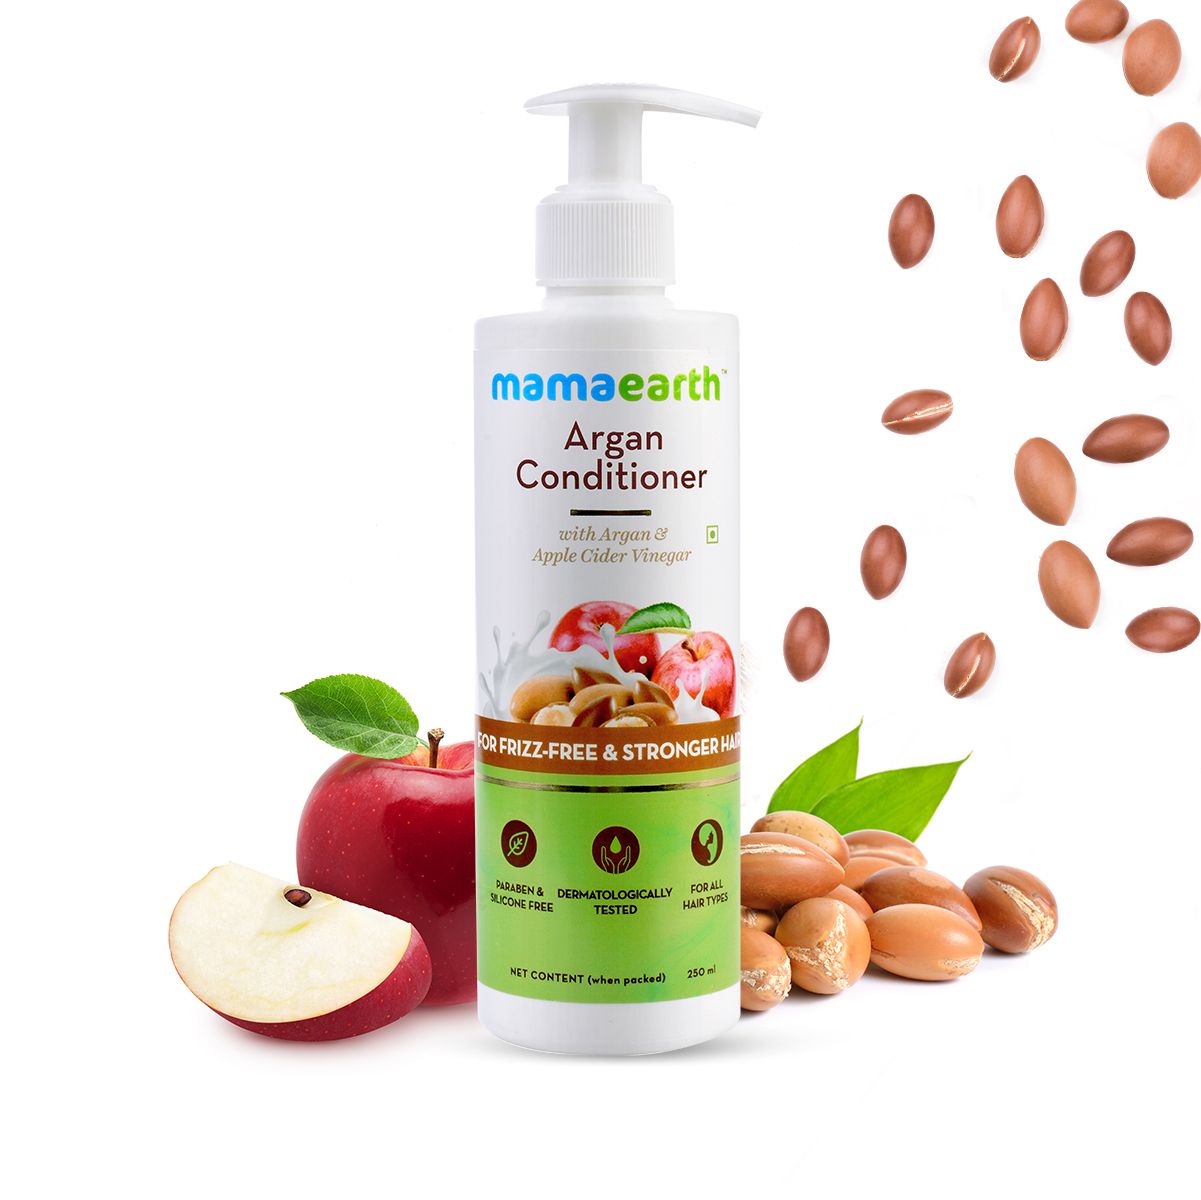 Mamaearth Rice Water Conditioner Review - RJ PRO REVIEWS